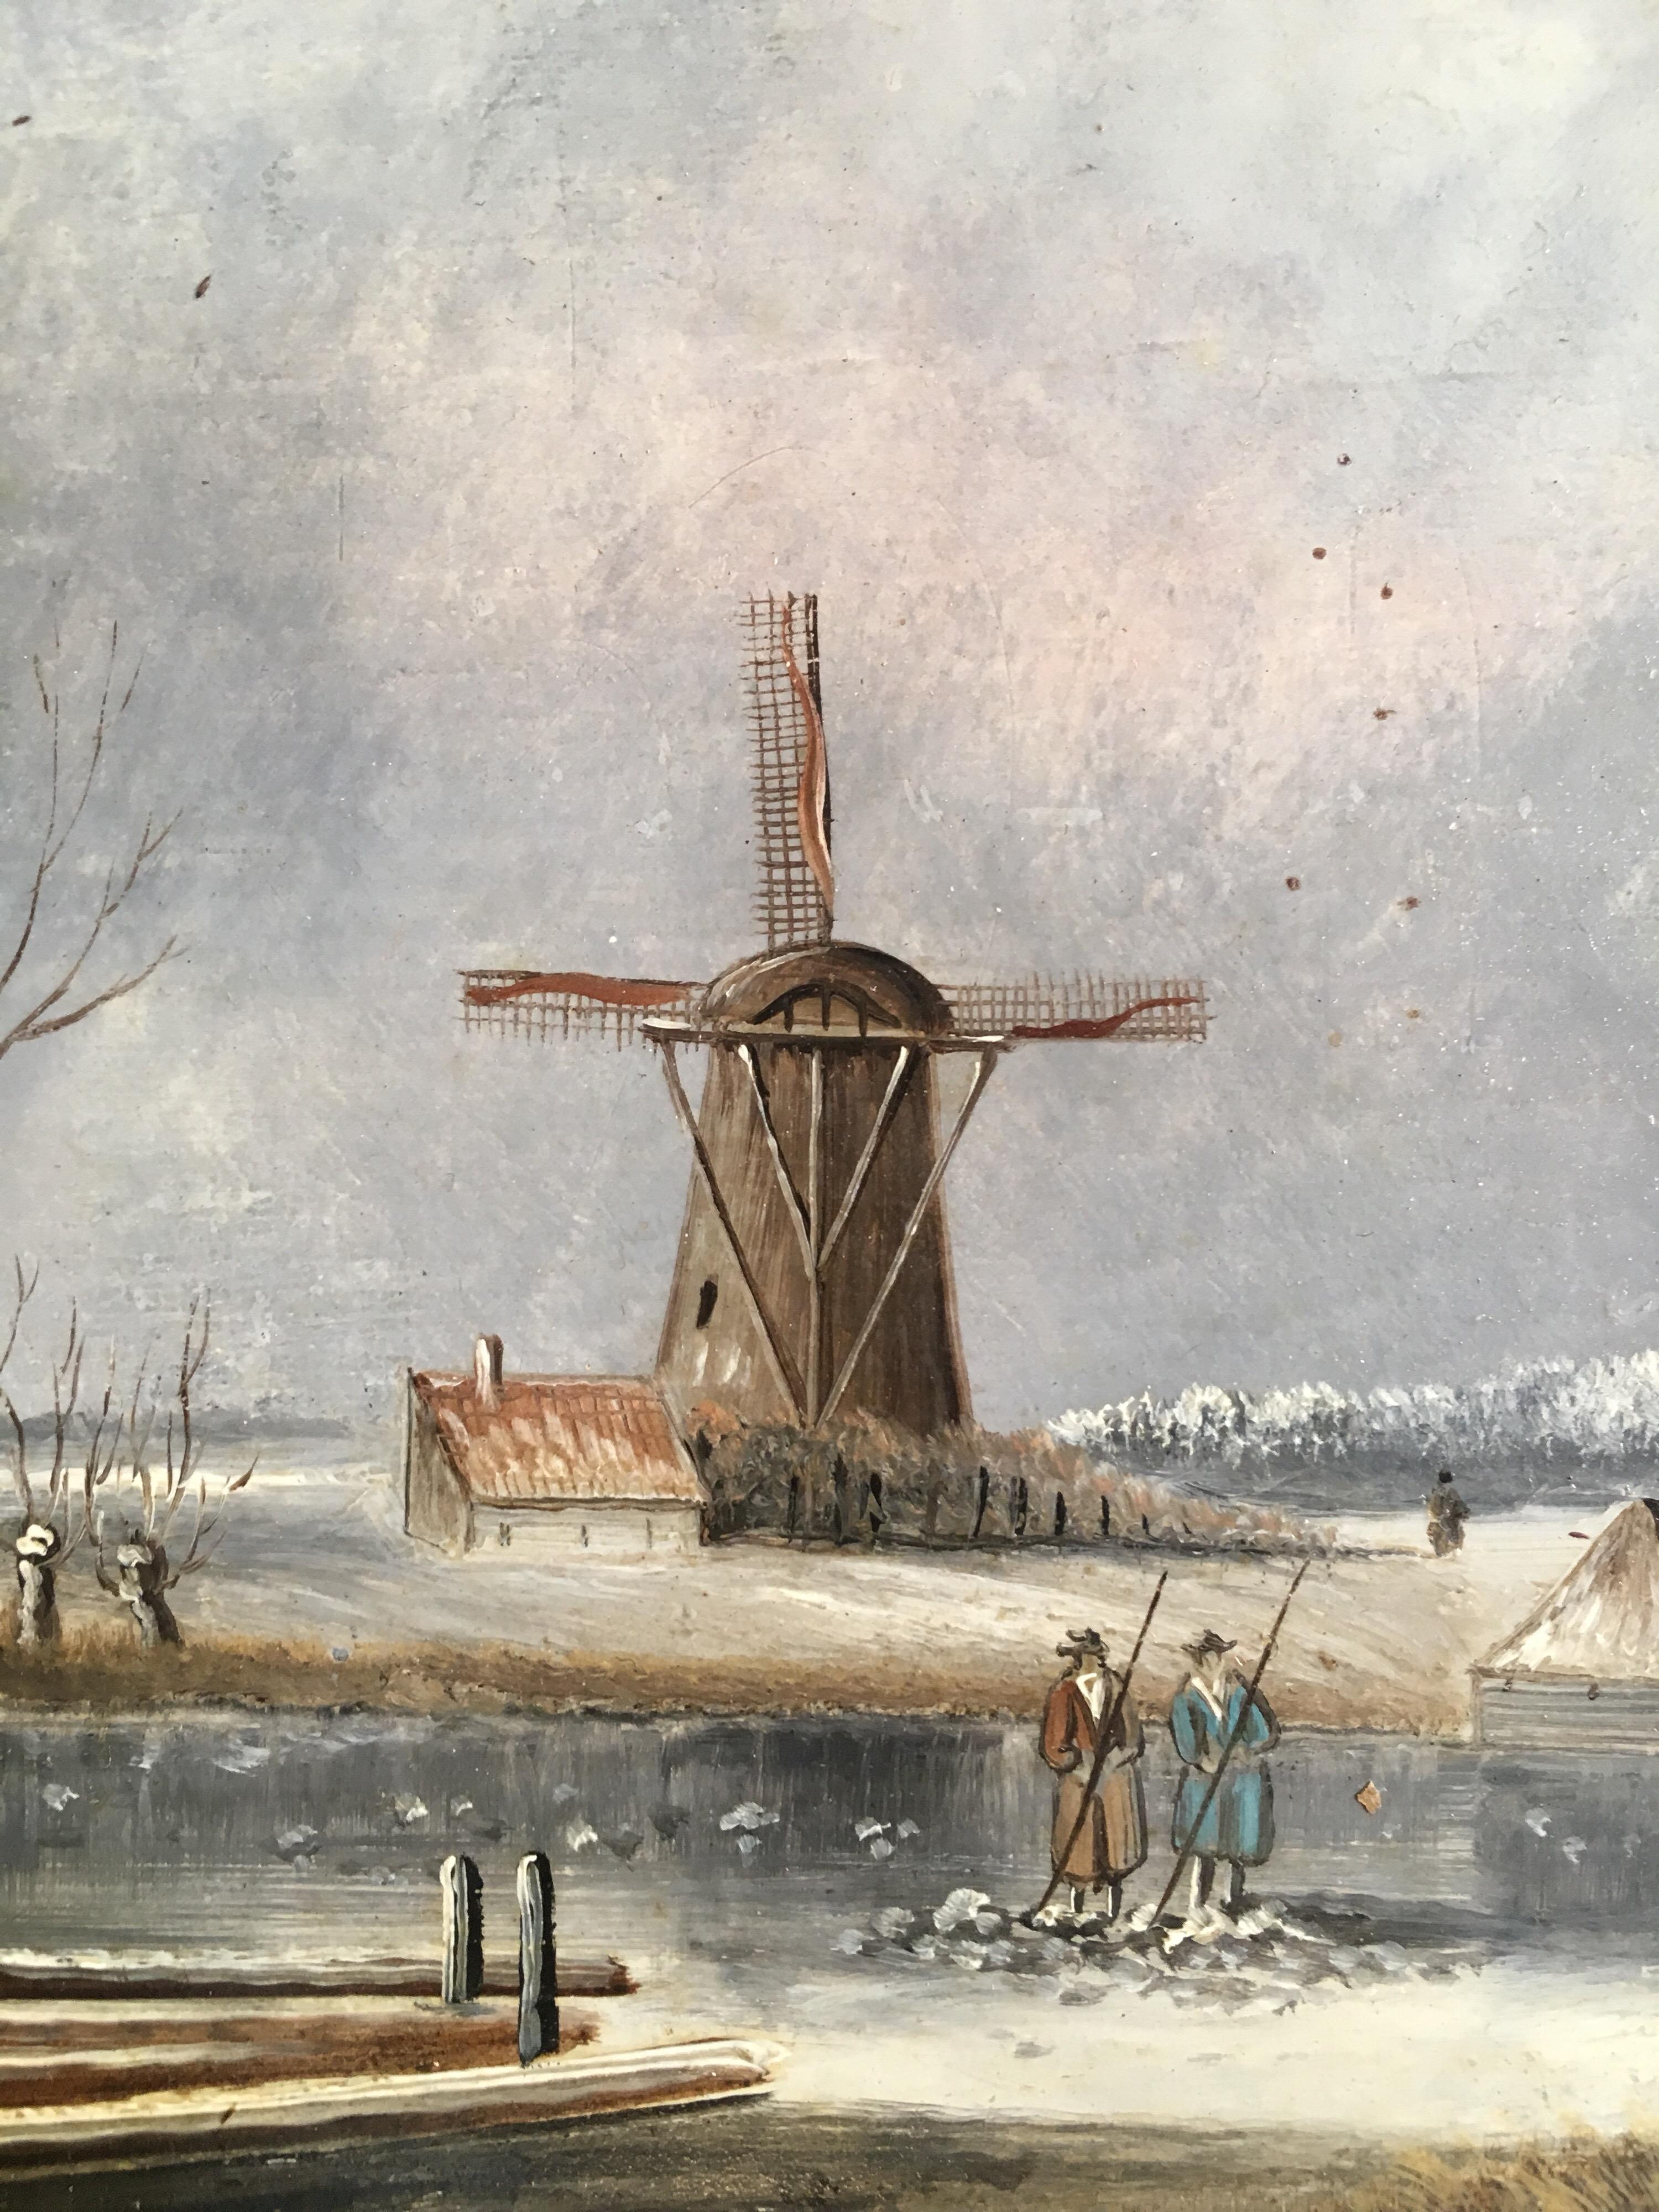 The Old Windmill
British School, 19th century
Oil painting on wood panel, framed
Framed size: 10 x 13 inches

Fine quality depiction of a traditional frozen Dutch winters landscape. There is an old windmill in the distance, with figures walking